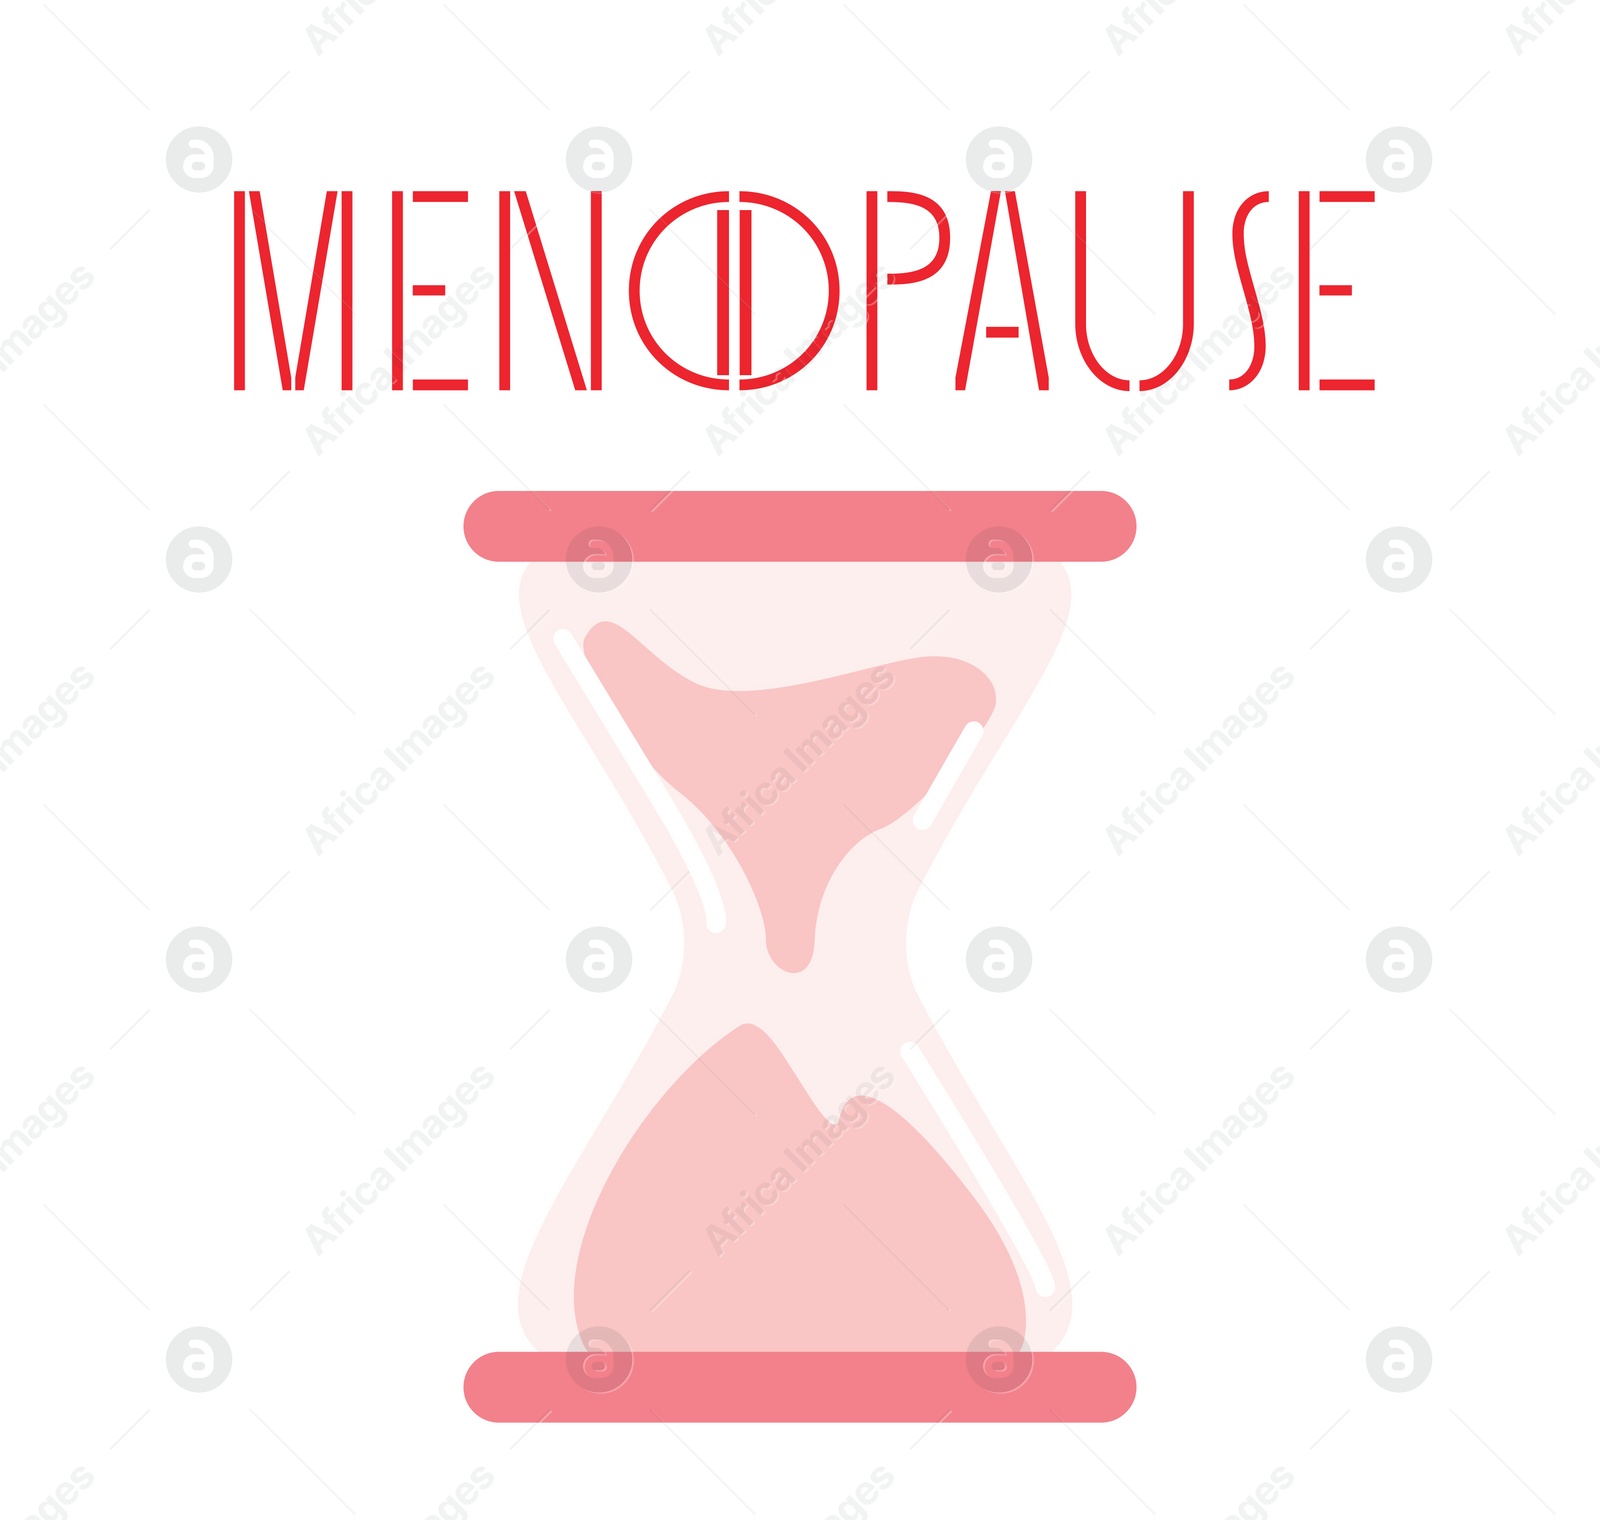 Illustration of Menstrual cycle. Word Menopause with letter O as pause button and sandglass on white background. Illustration design